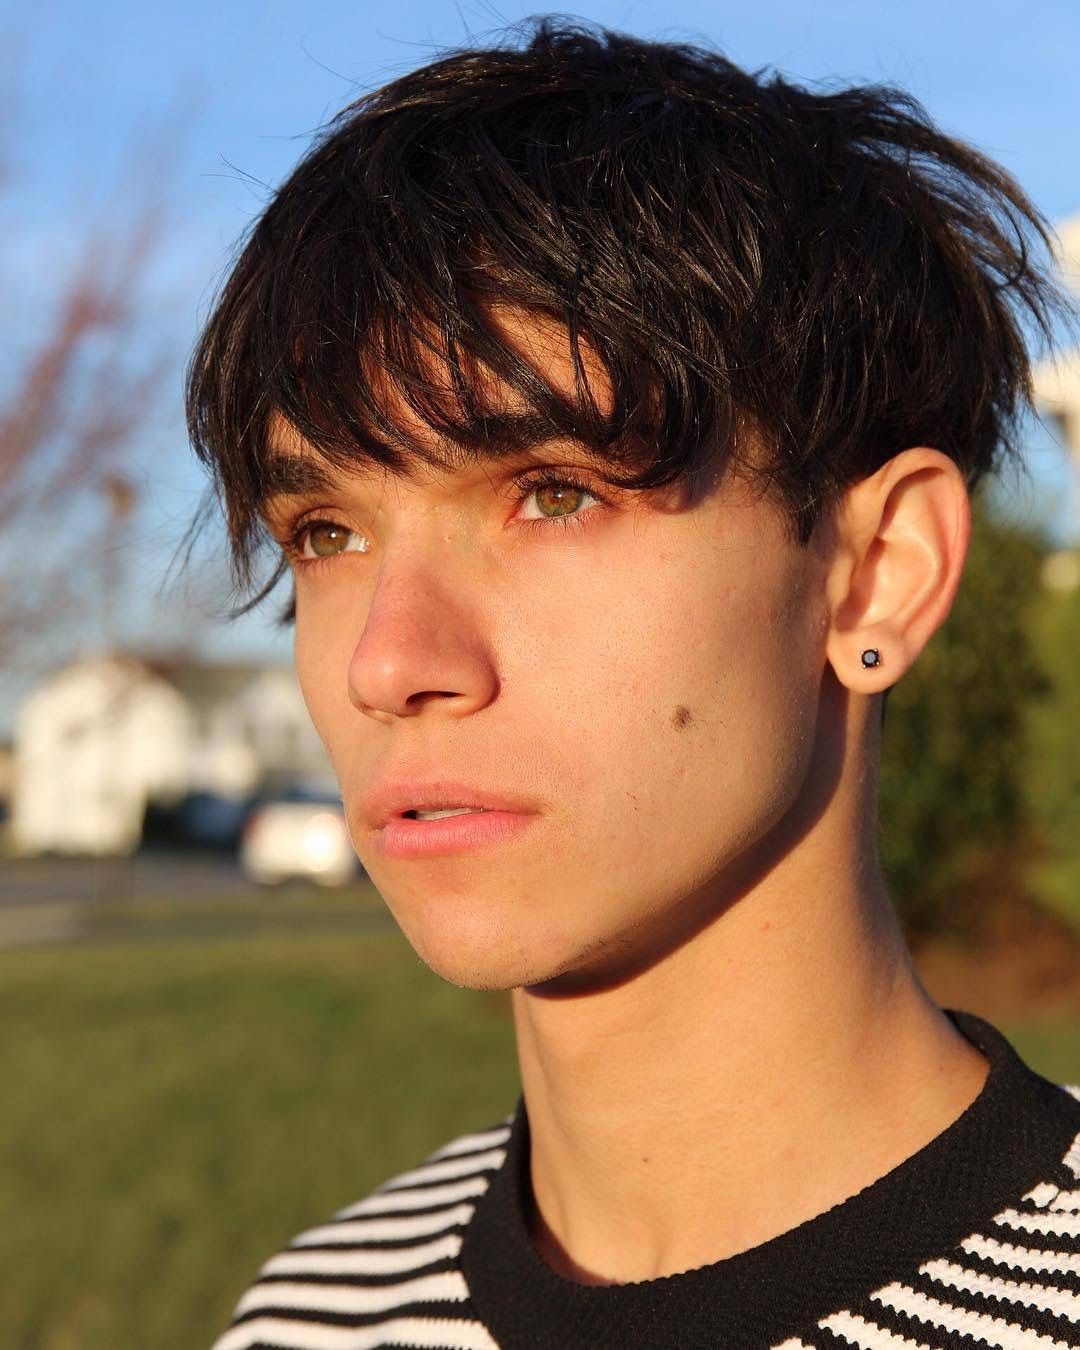 Lucas Dobre Age - The Rise Of Lucas Dobre And His Twin Brother Marcus